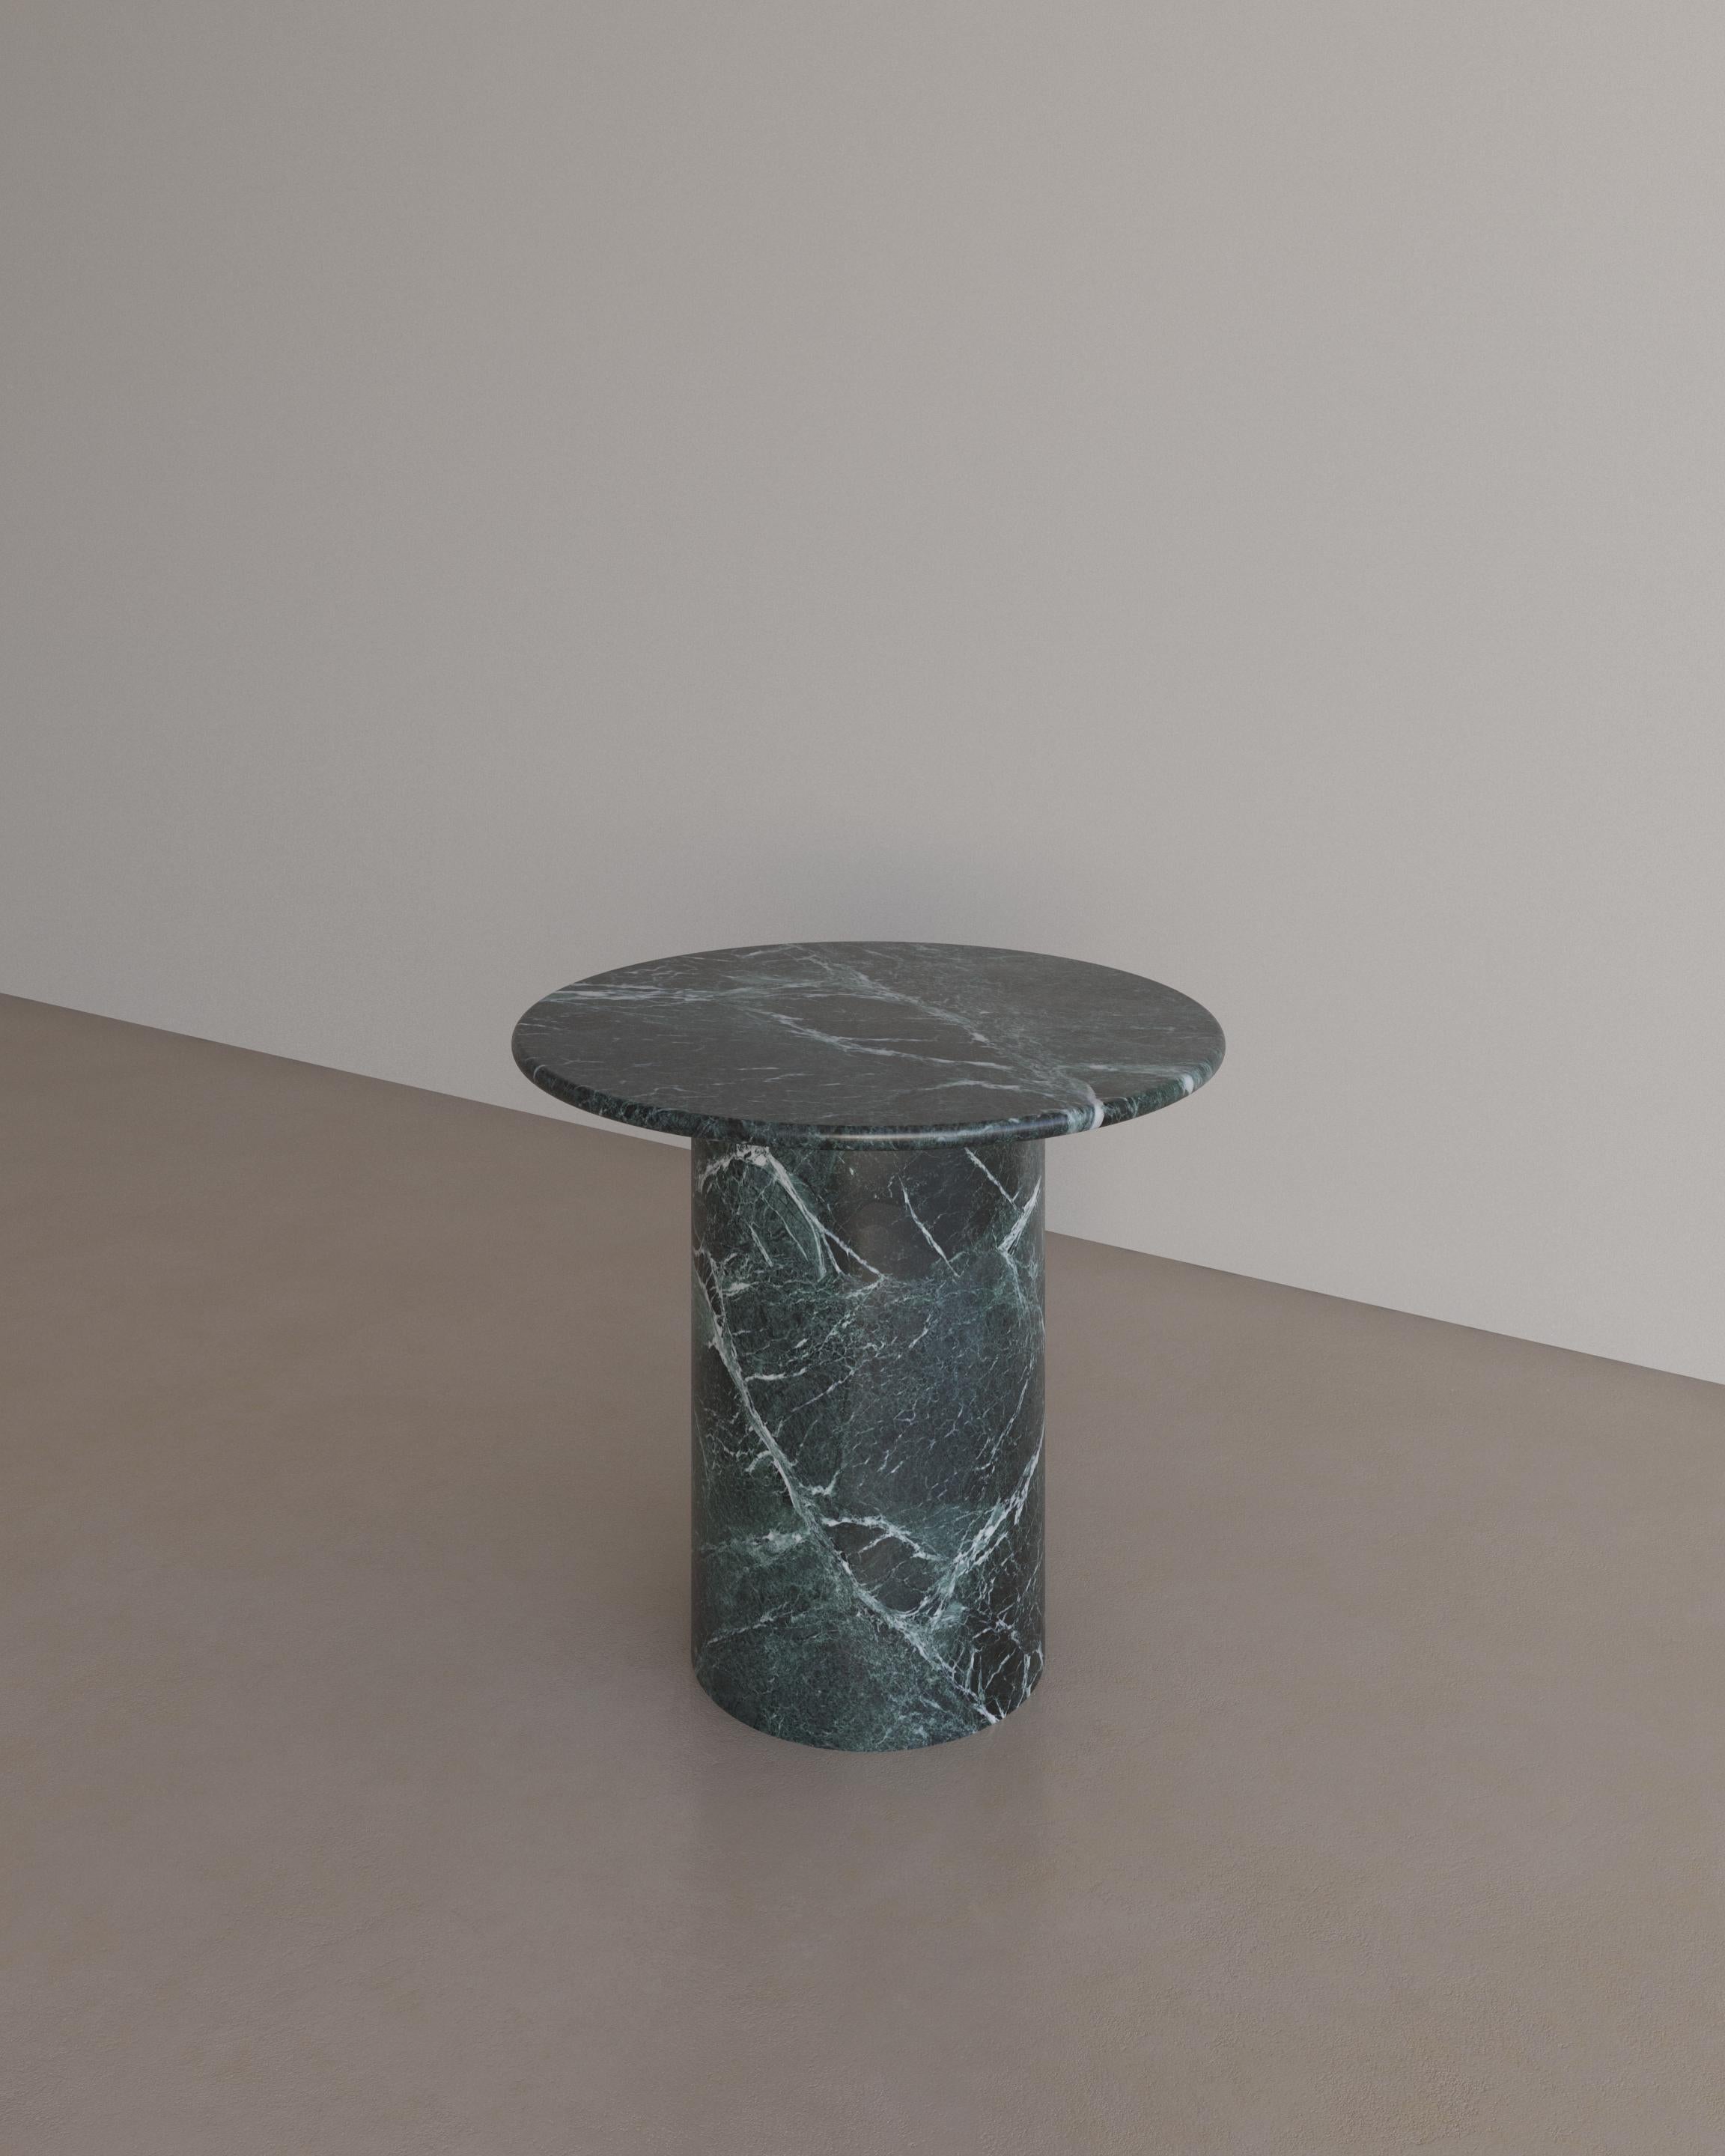 The Essentialist presents the Voyage Occasional Table I in Verde Alpi. 
The Voyage Occasional Table I celebrates the simple pleasures that define life and replenish the soul through harnessing essential form. Envisioned as an ode to historical